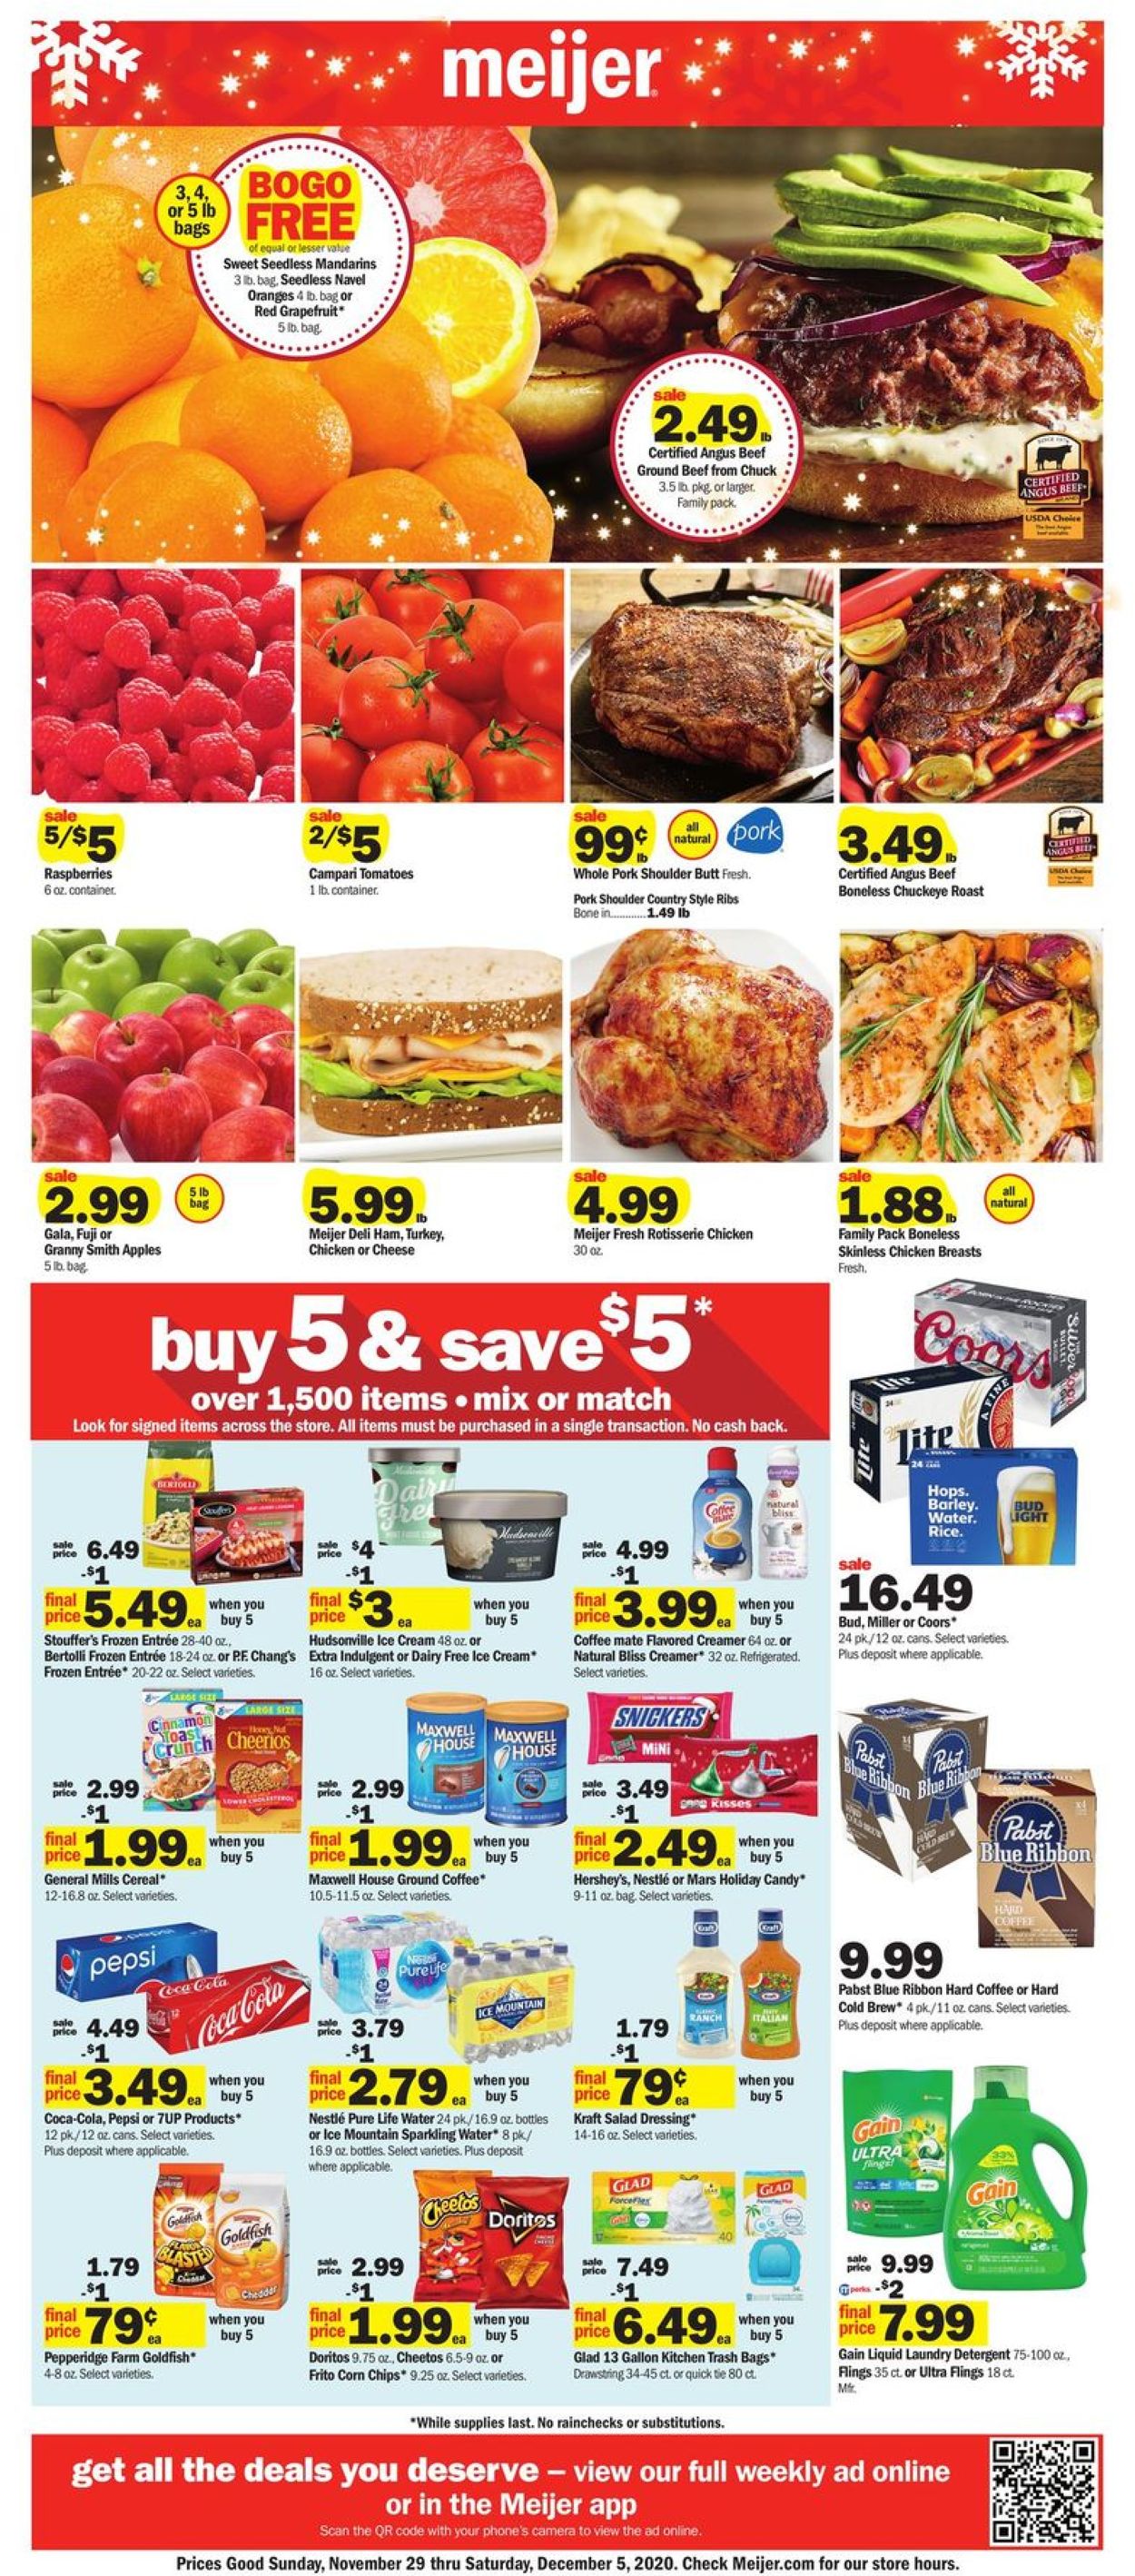 Meijer Cyber Monday 2020 Weekly Ad Circular - valid 11/29-12/05/2020